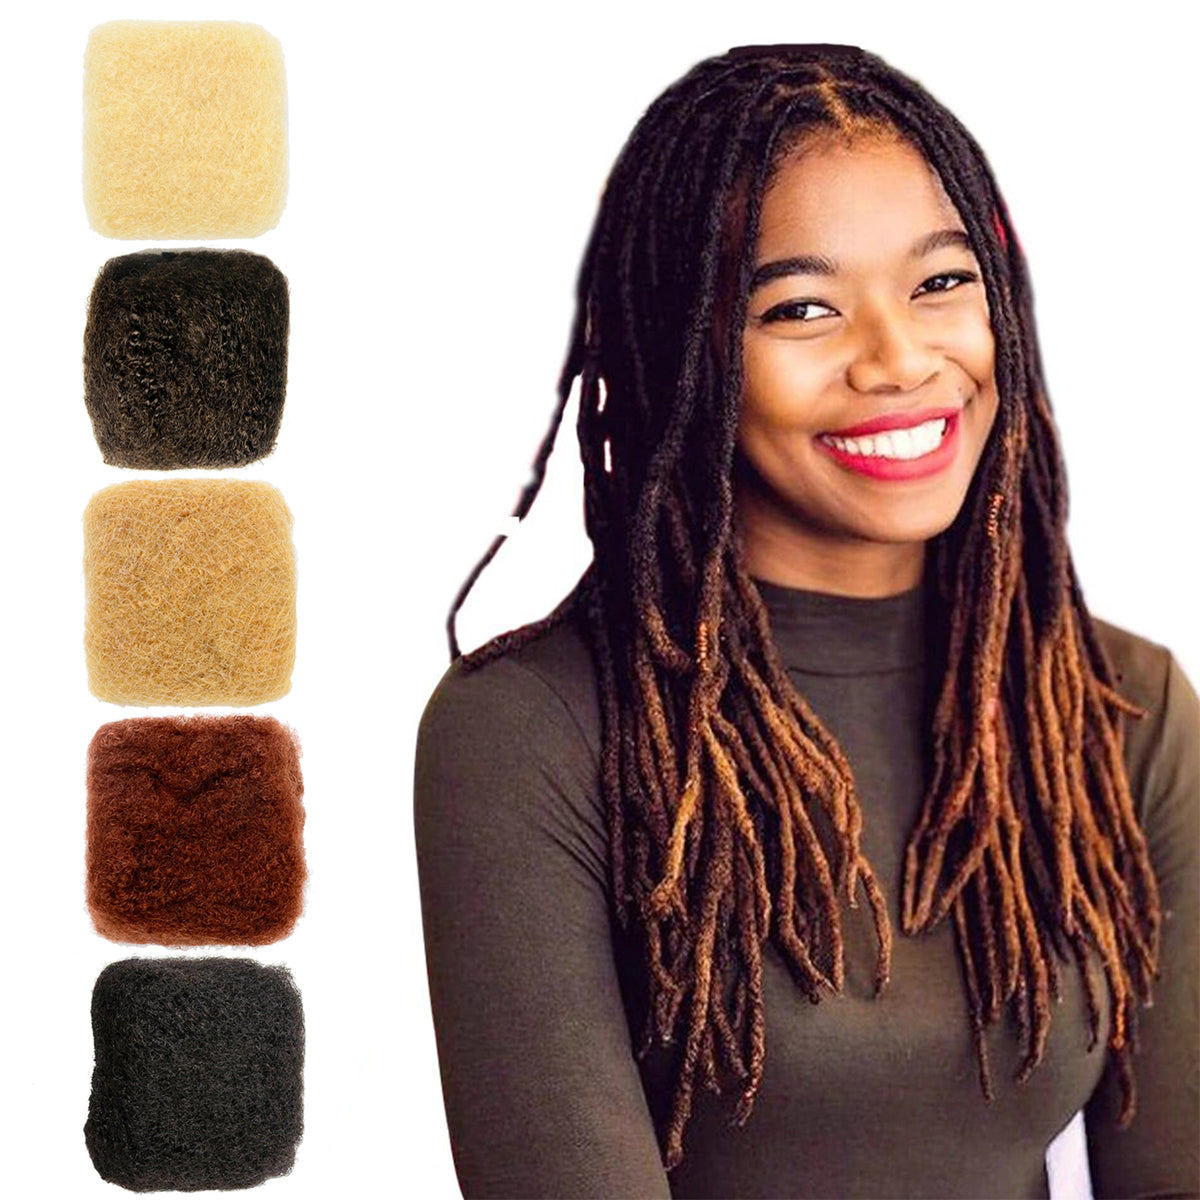 Afro Kinky Human Hairs For Making,Repairing & Bulking Locs 8 Inch Long Afro Kinky Bulk Human Hair For Dreadlock Extensions 100% Natural Afro Hairs For Twisting & Braiding 29g/1Oz (Natural Black,8Inch)